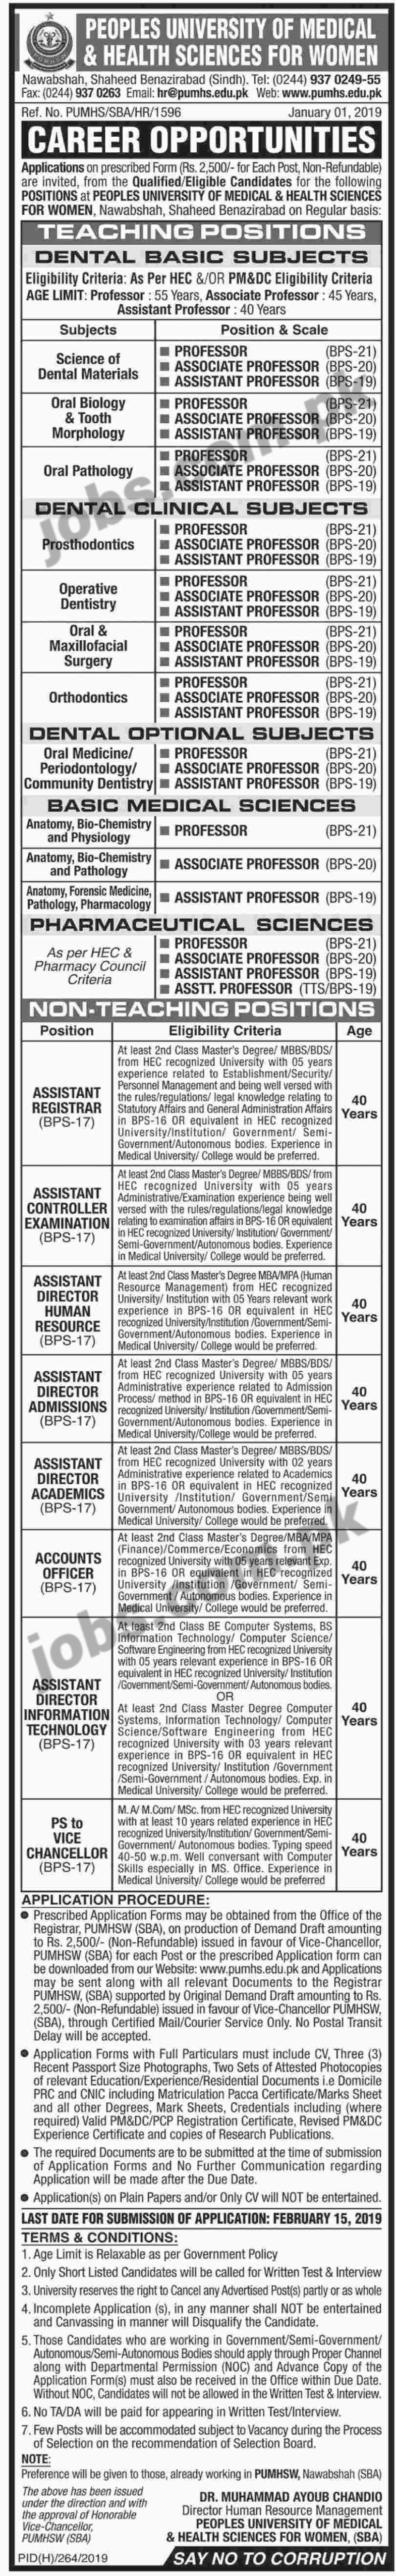 Peoples University of Medical & Health Sciences for Women Jobs 2019 for 50+ Teaching & Non-Teaching Posts